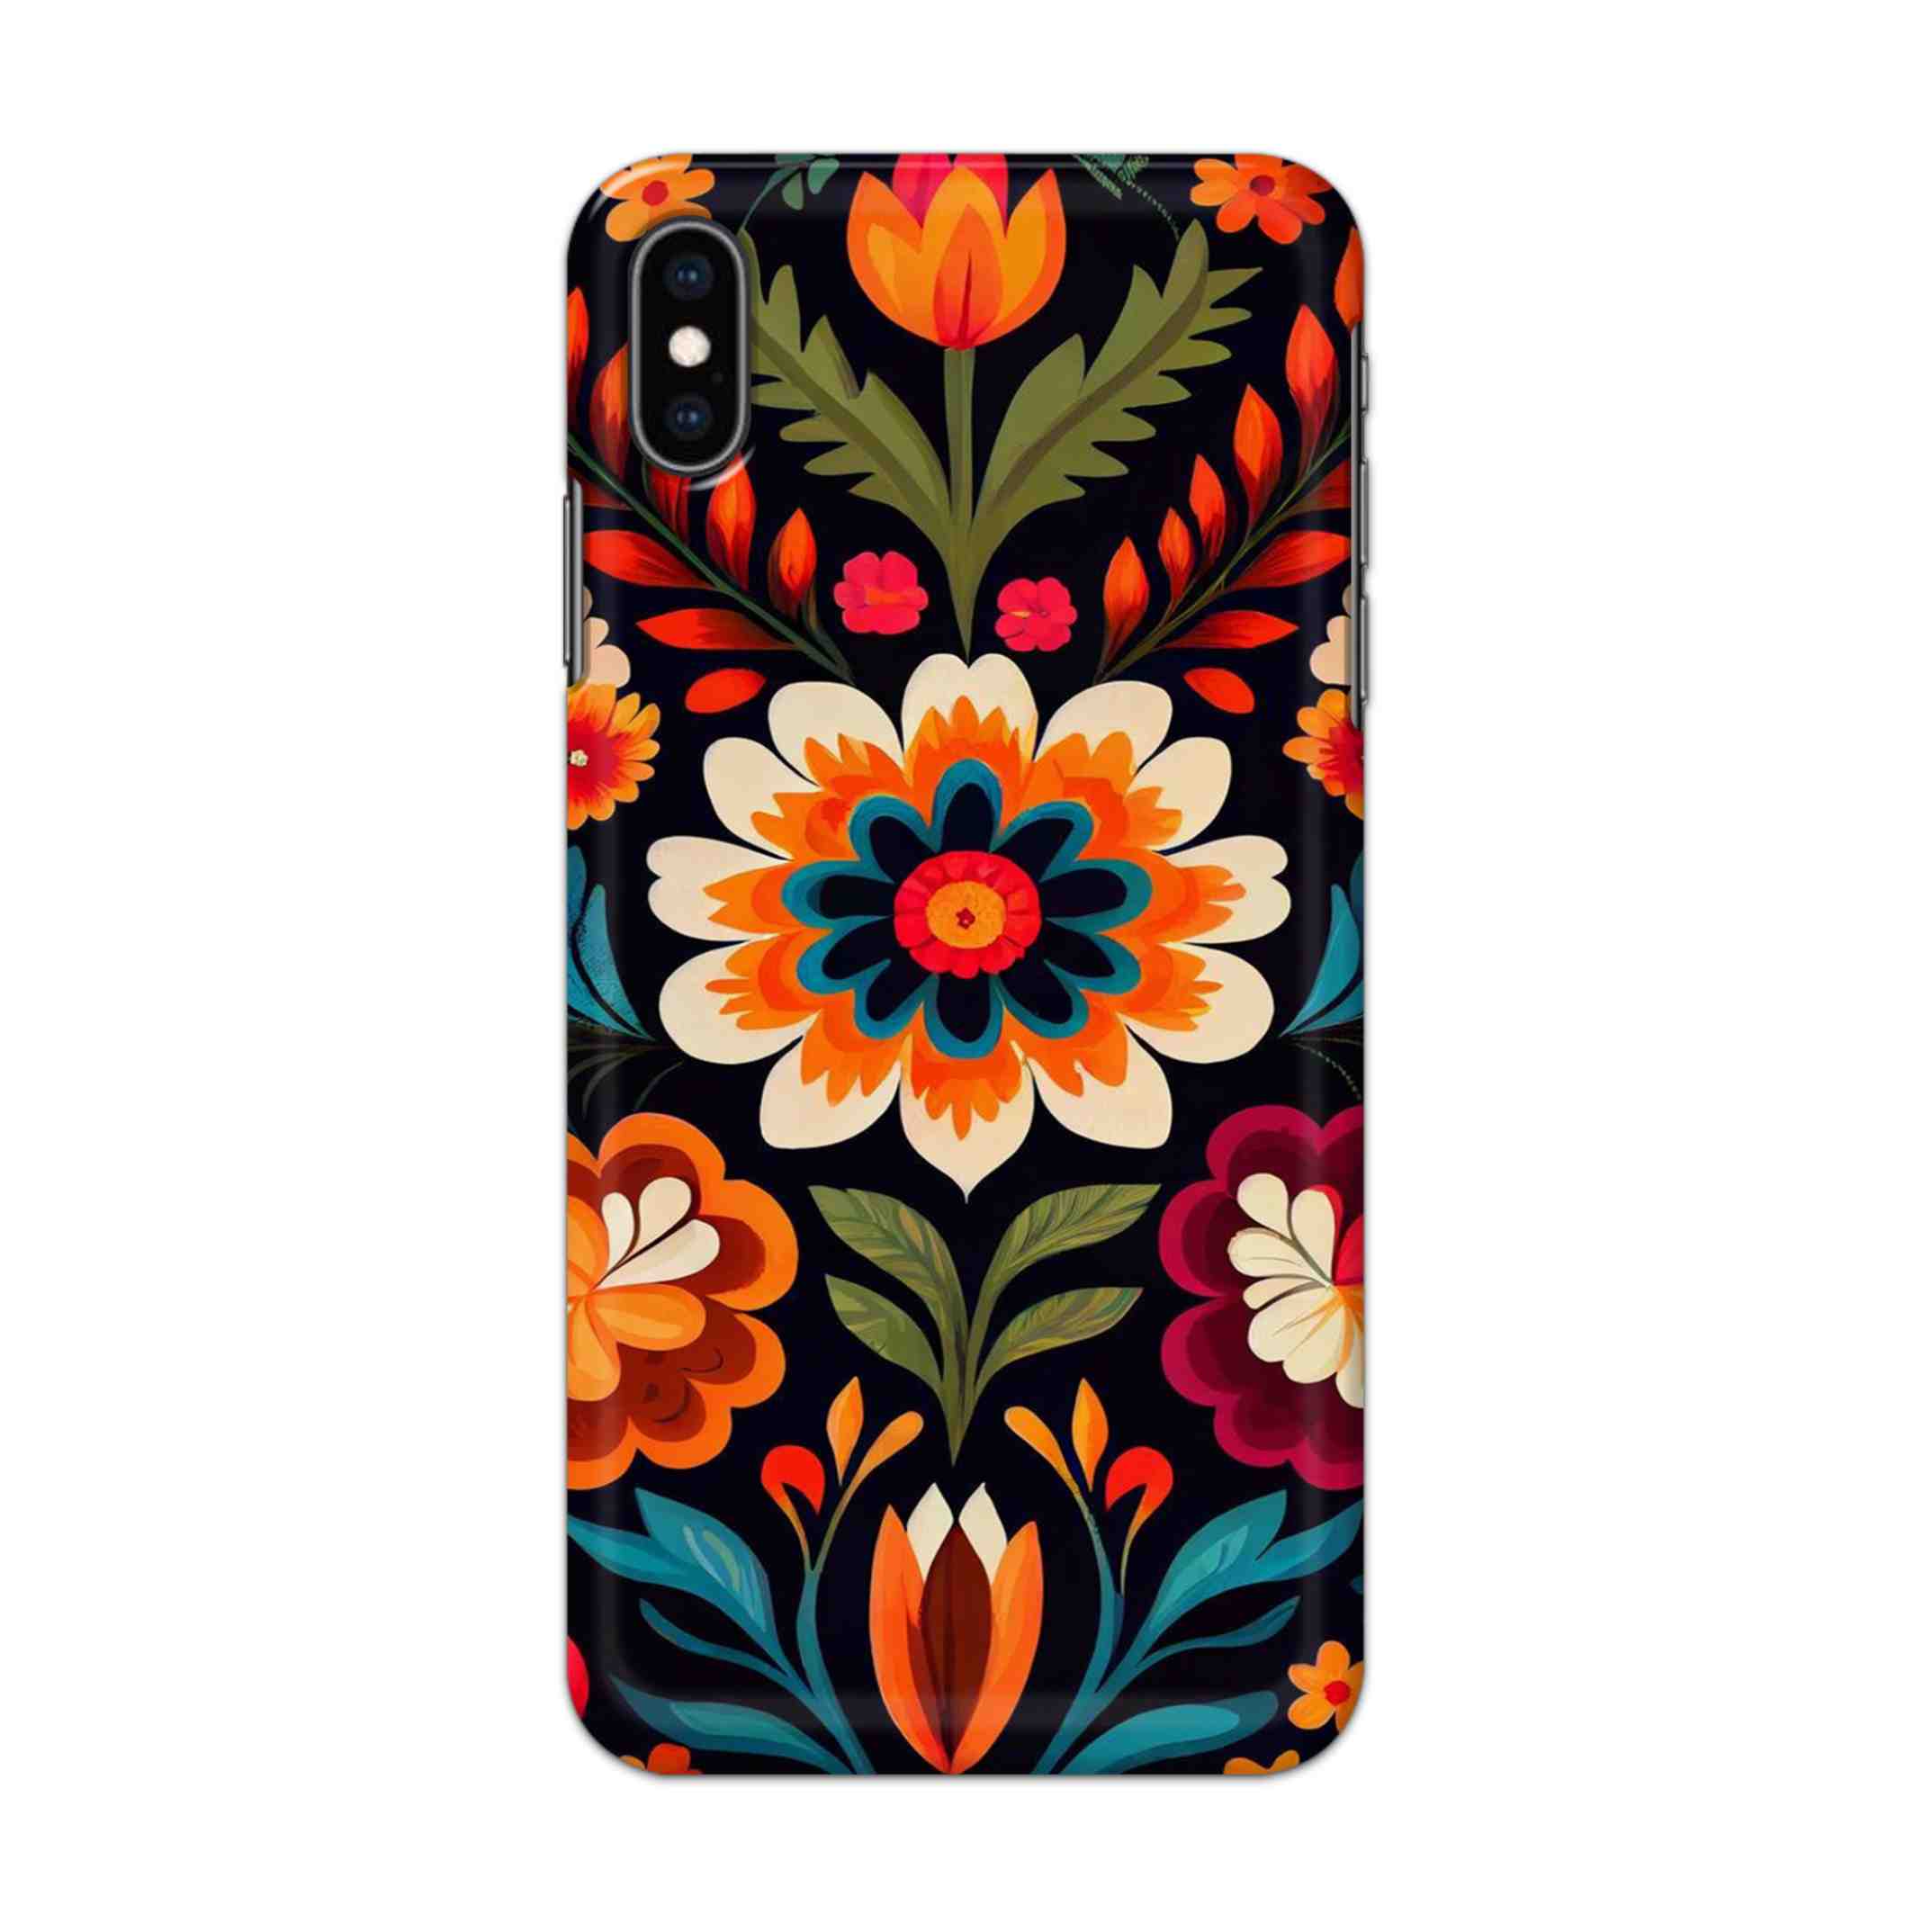 Buy Flower Hard Back Mobile Phone Case/Cover For iPhone XS MAX Online